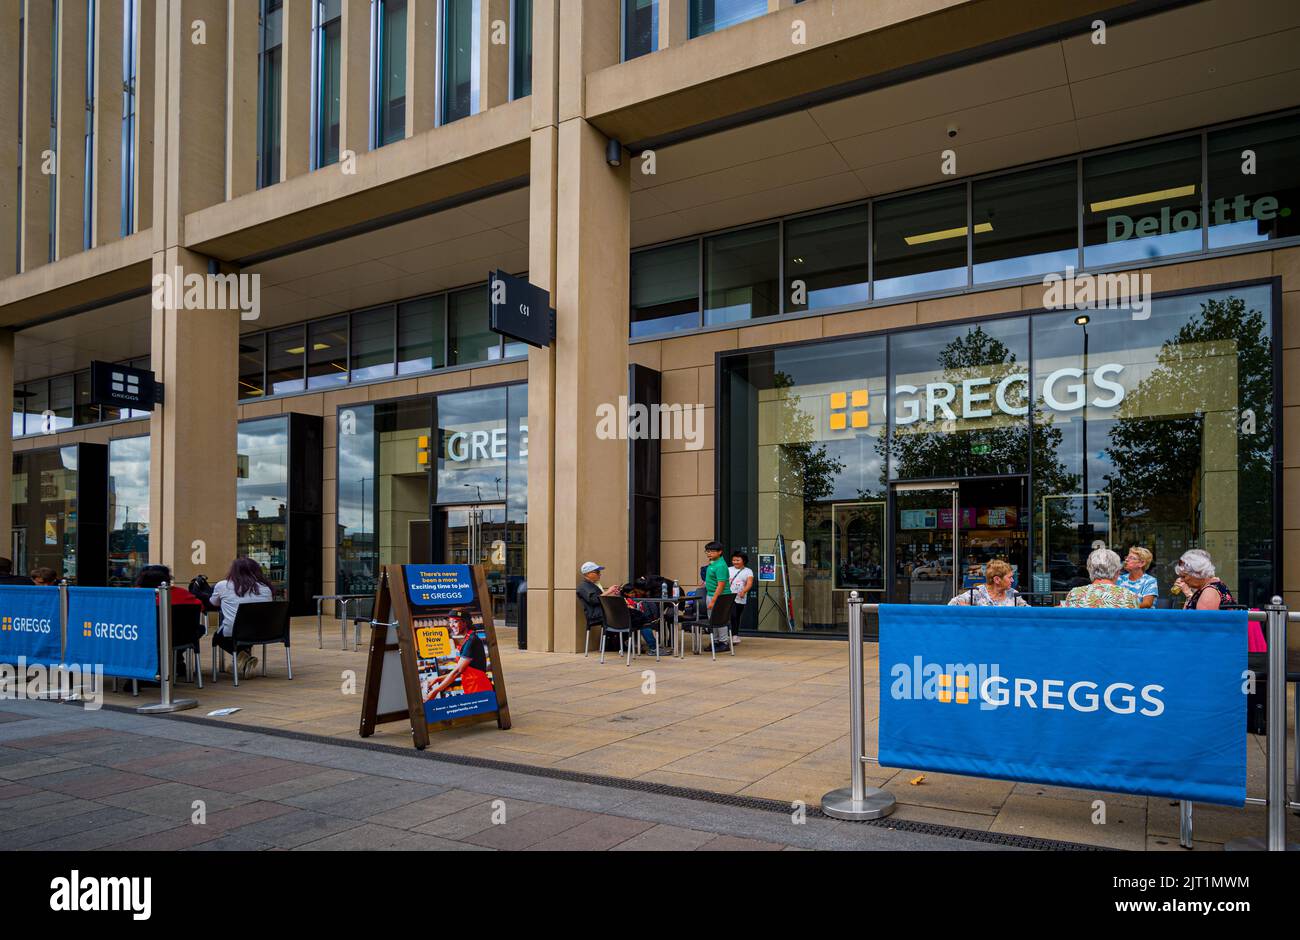 Greggs Bakery - Greggs Cafe and Food Store à Cambridge Station Square, Cambridge, Royaume-Uni. Banque D'Images